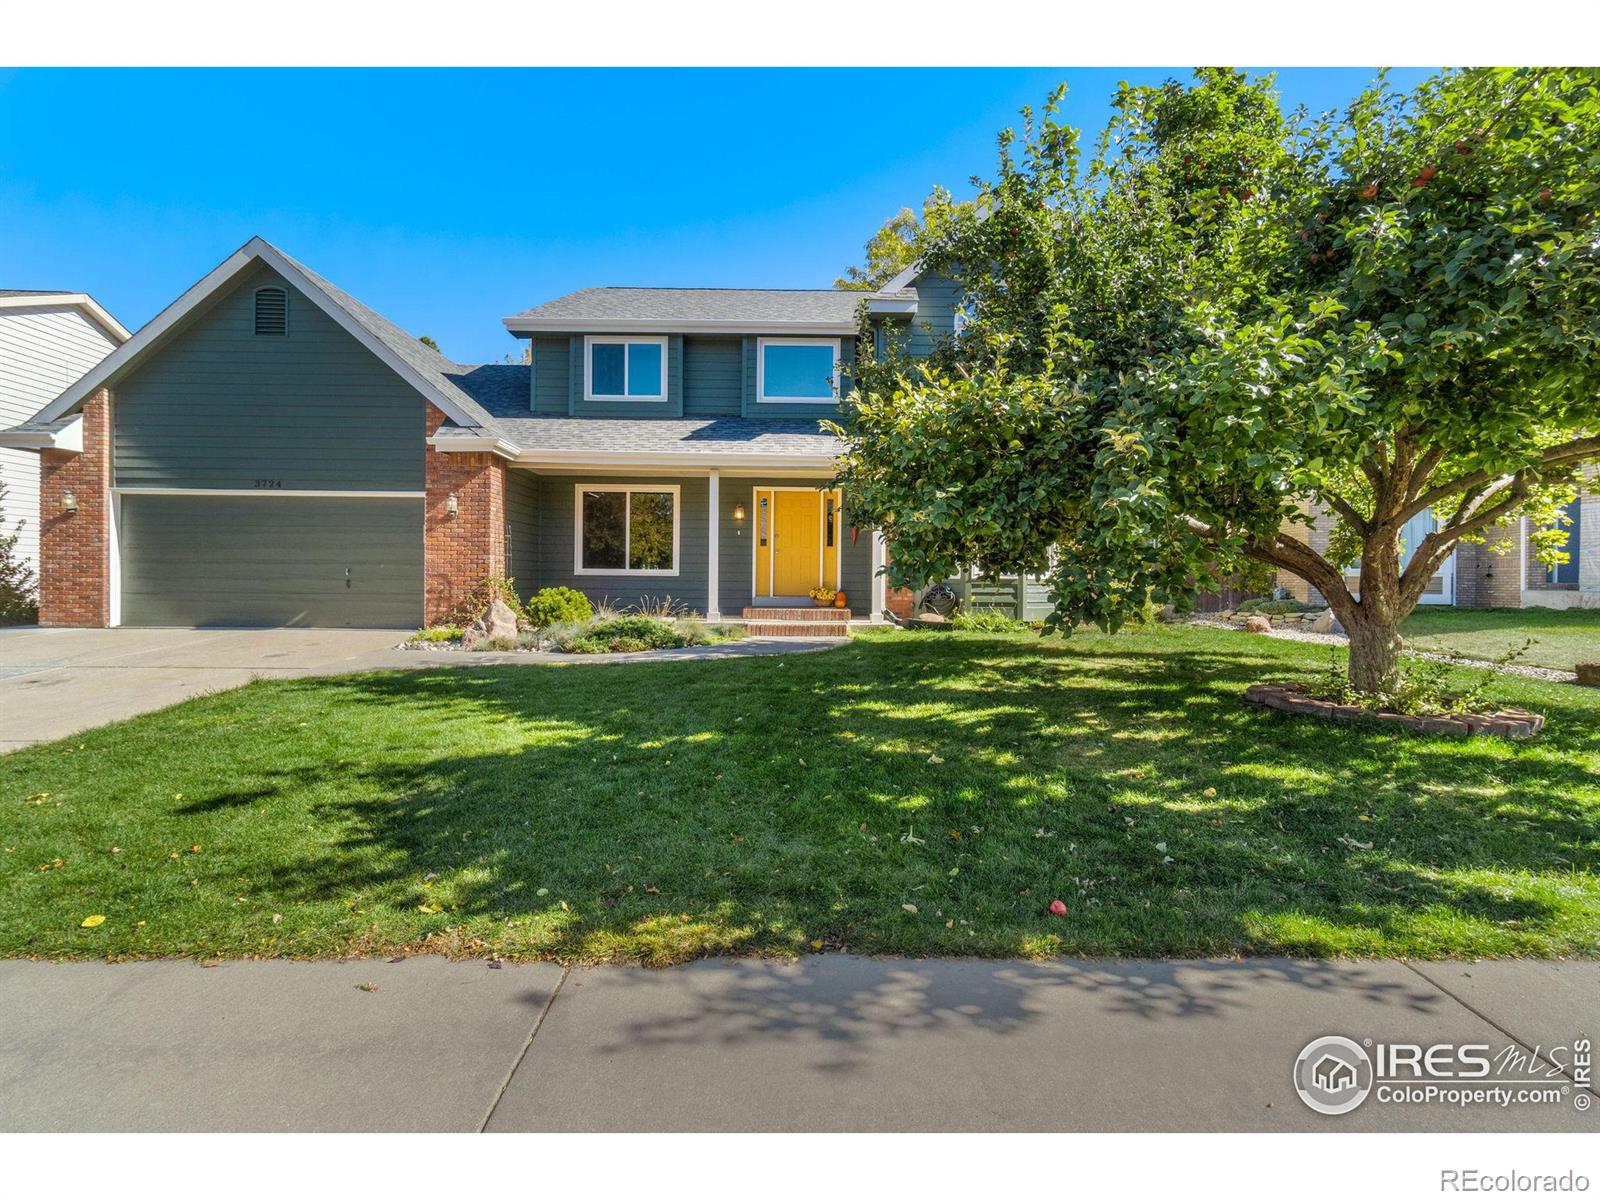 3724  Ashmount Drive, fort collins MLS: 456789998517 Beds: 5 Baths: 4 Price: $760,000